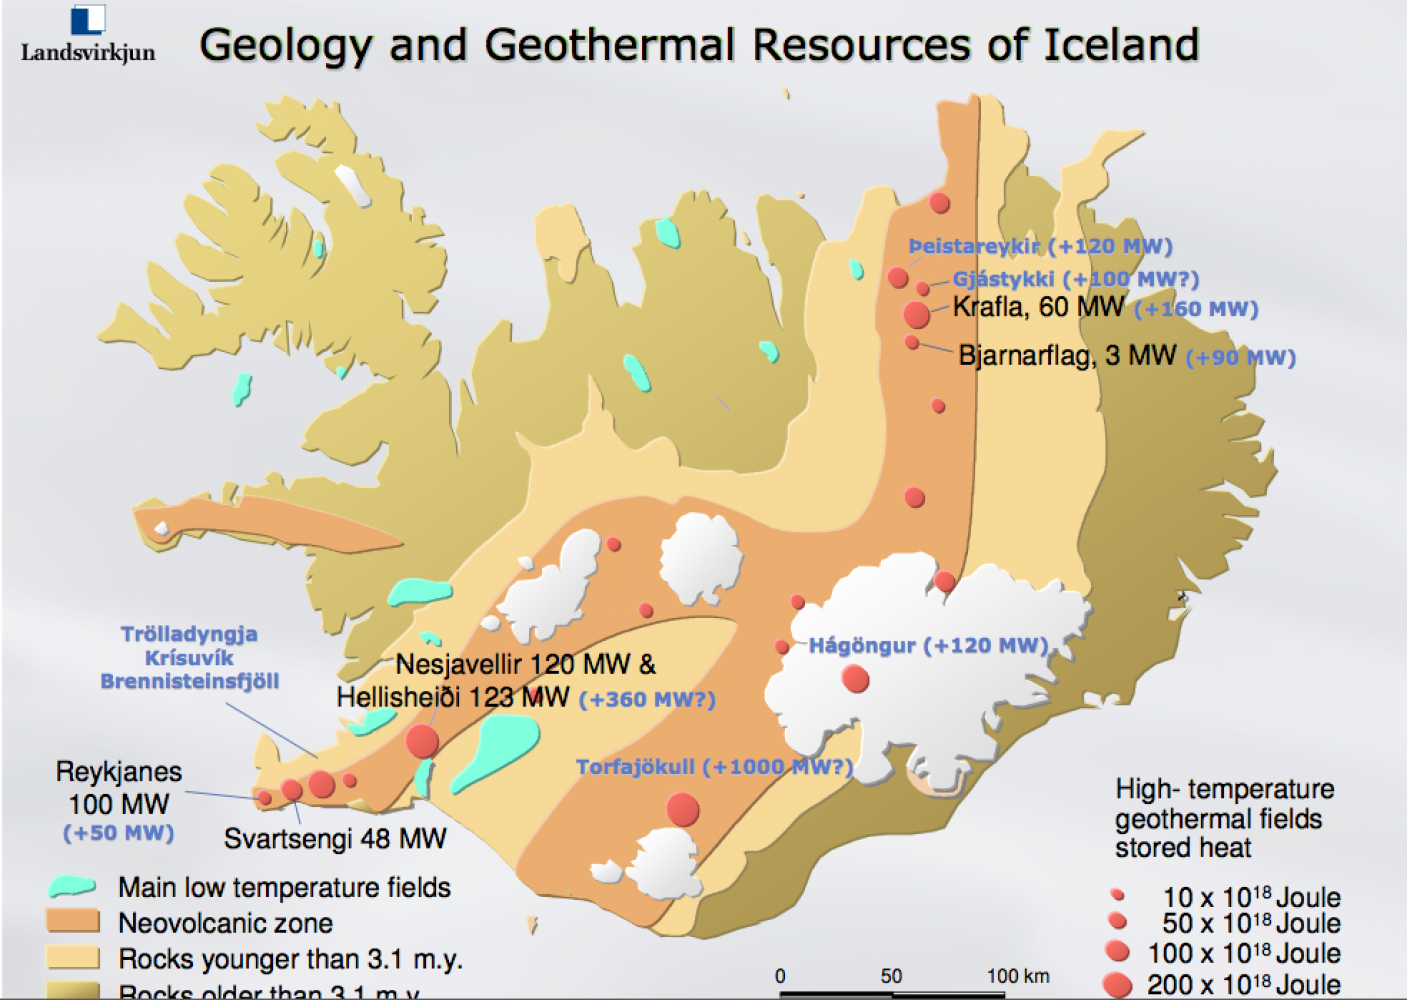 Geothermal resources of Iceland